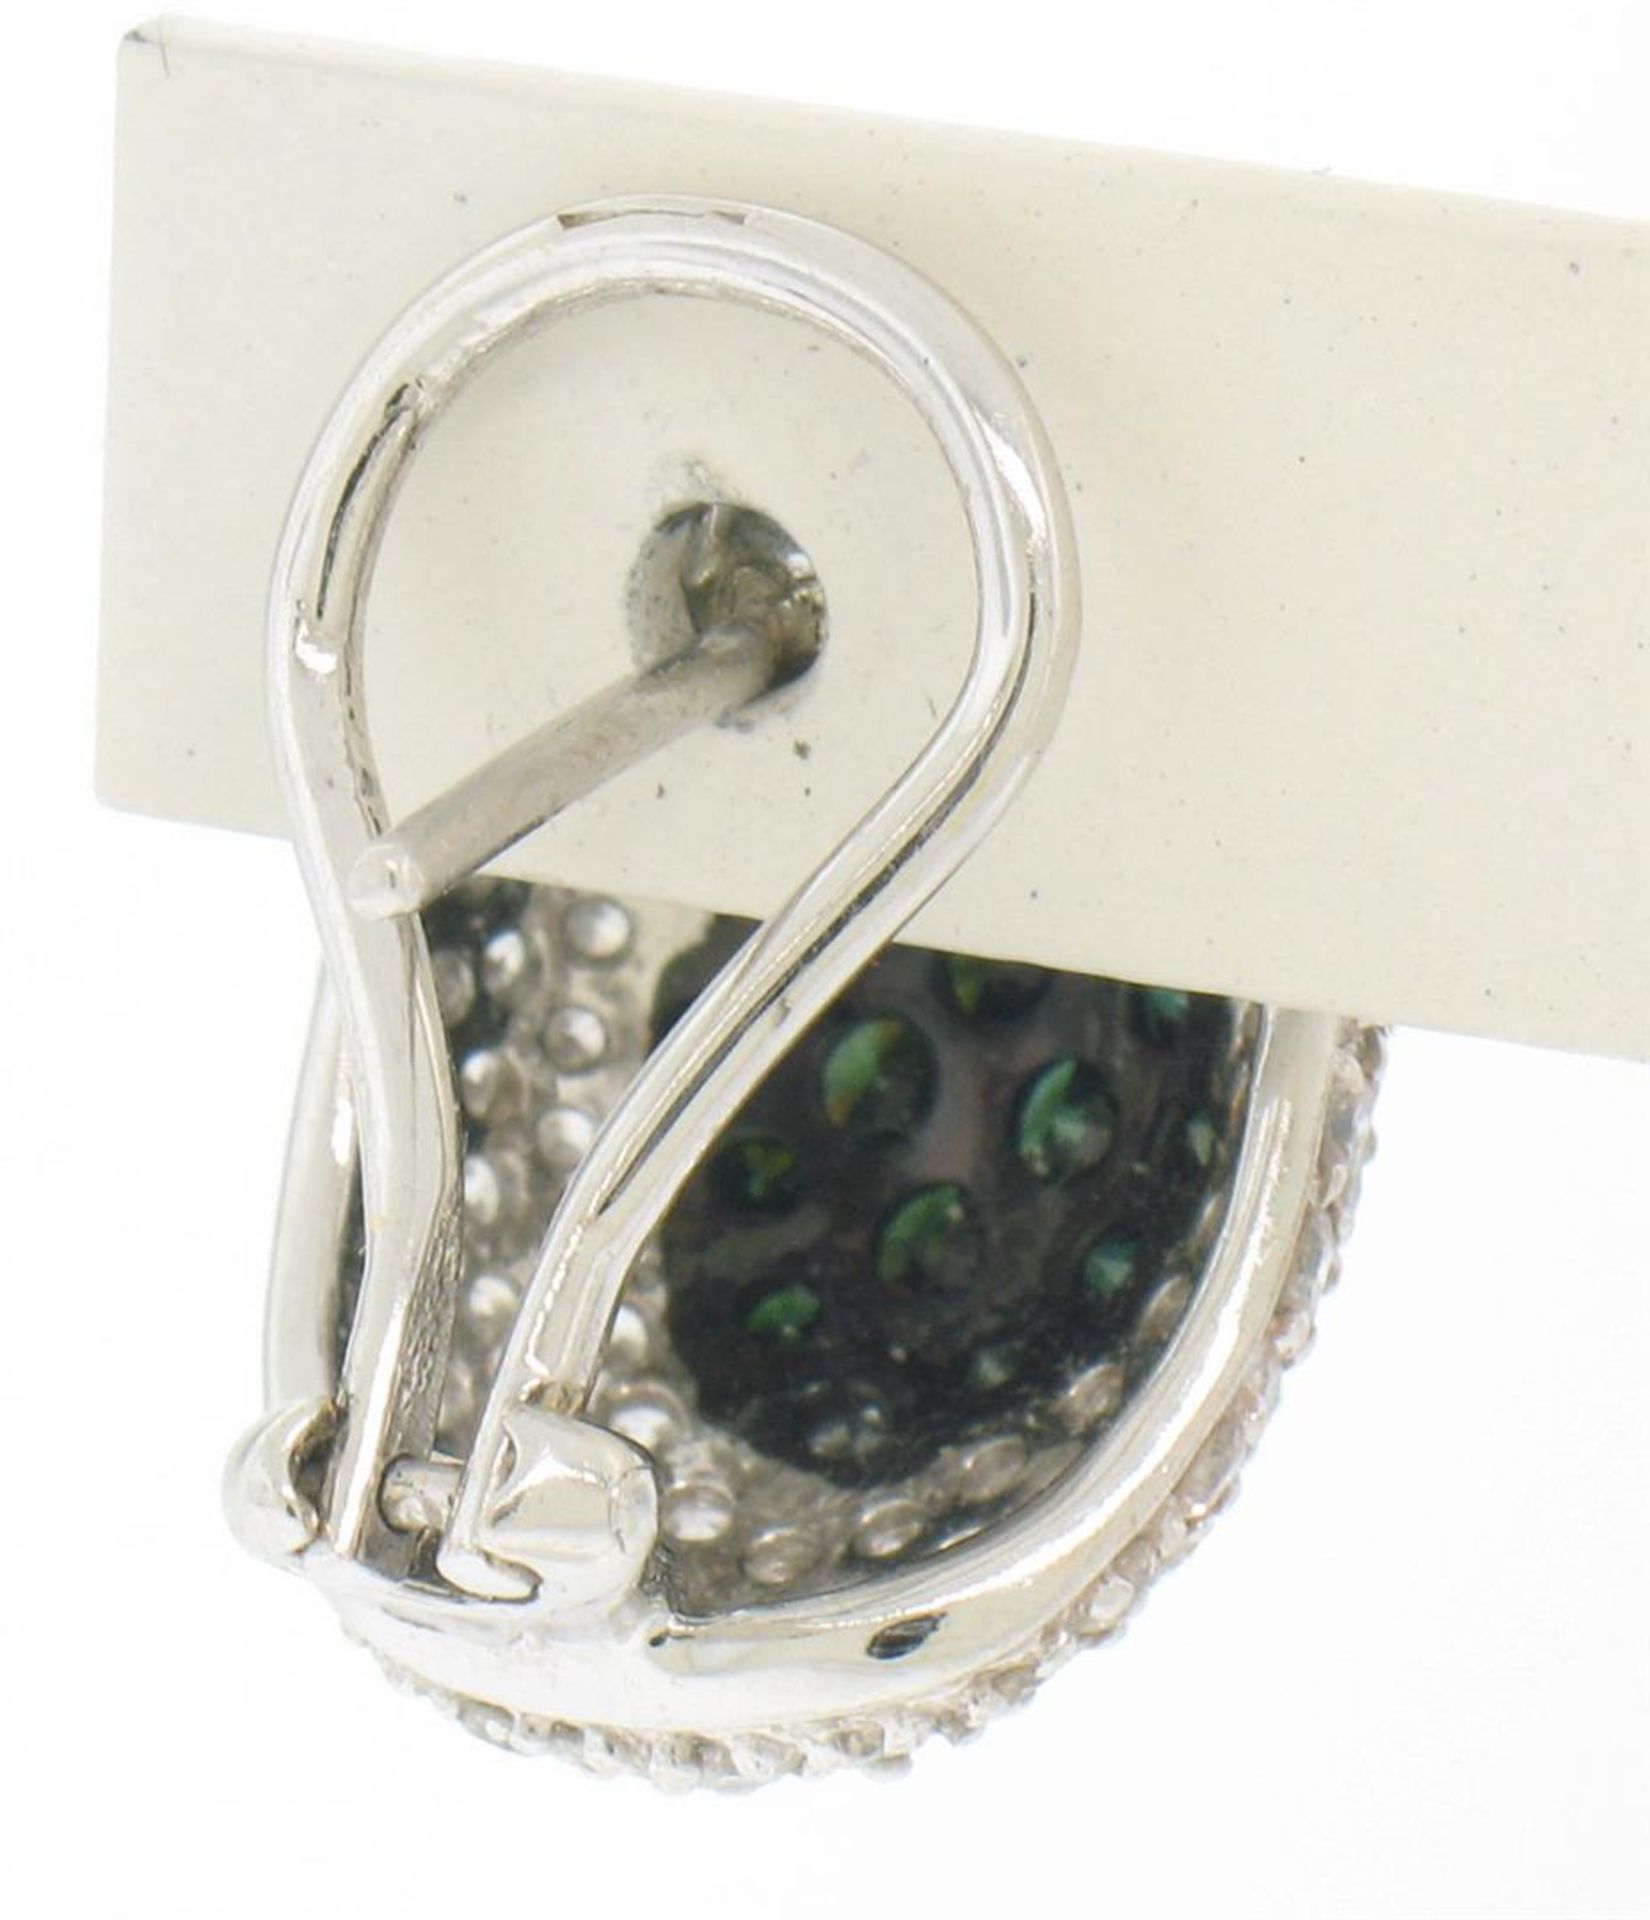 18k Solid White Gold 3.60 ctw White & Black Diamond Drenched Dome Button Earring - Image 7 of 7